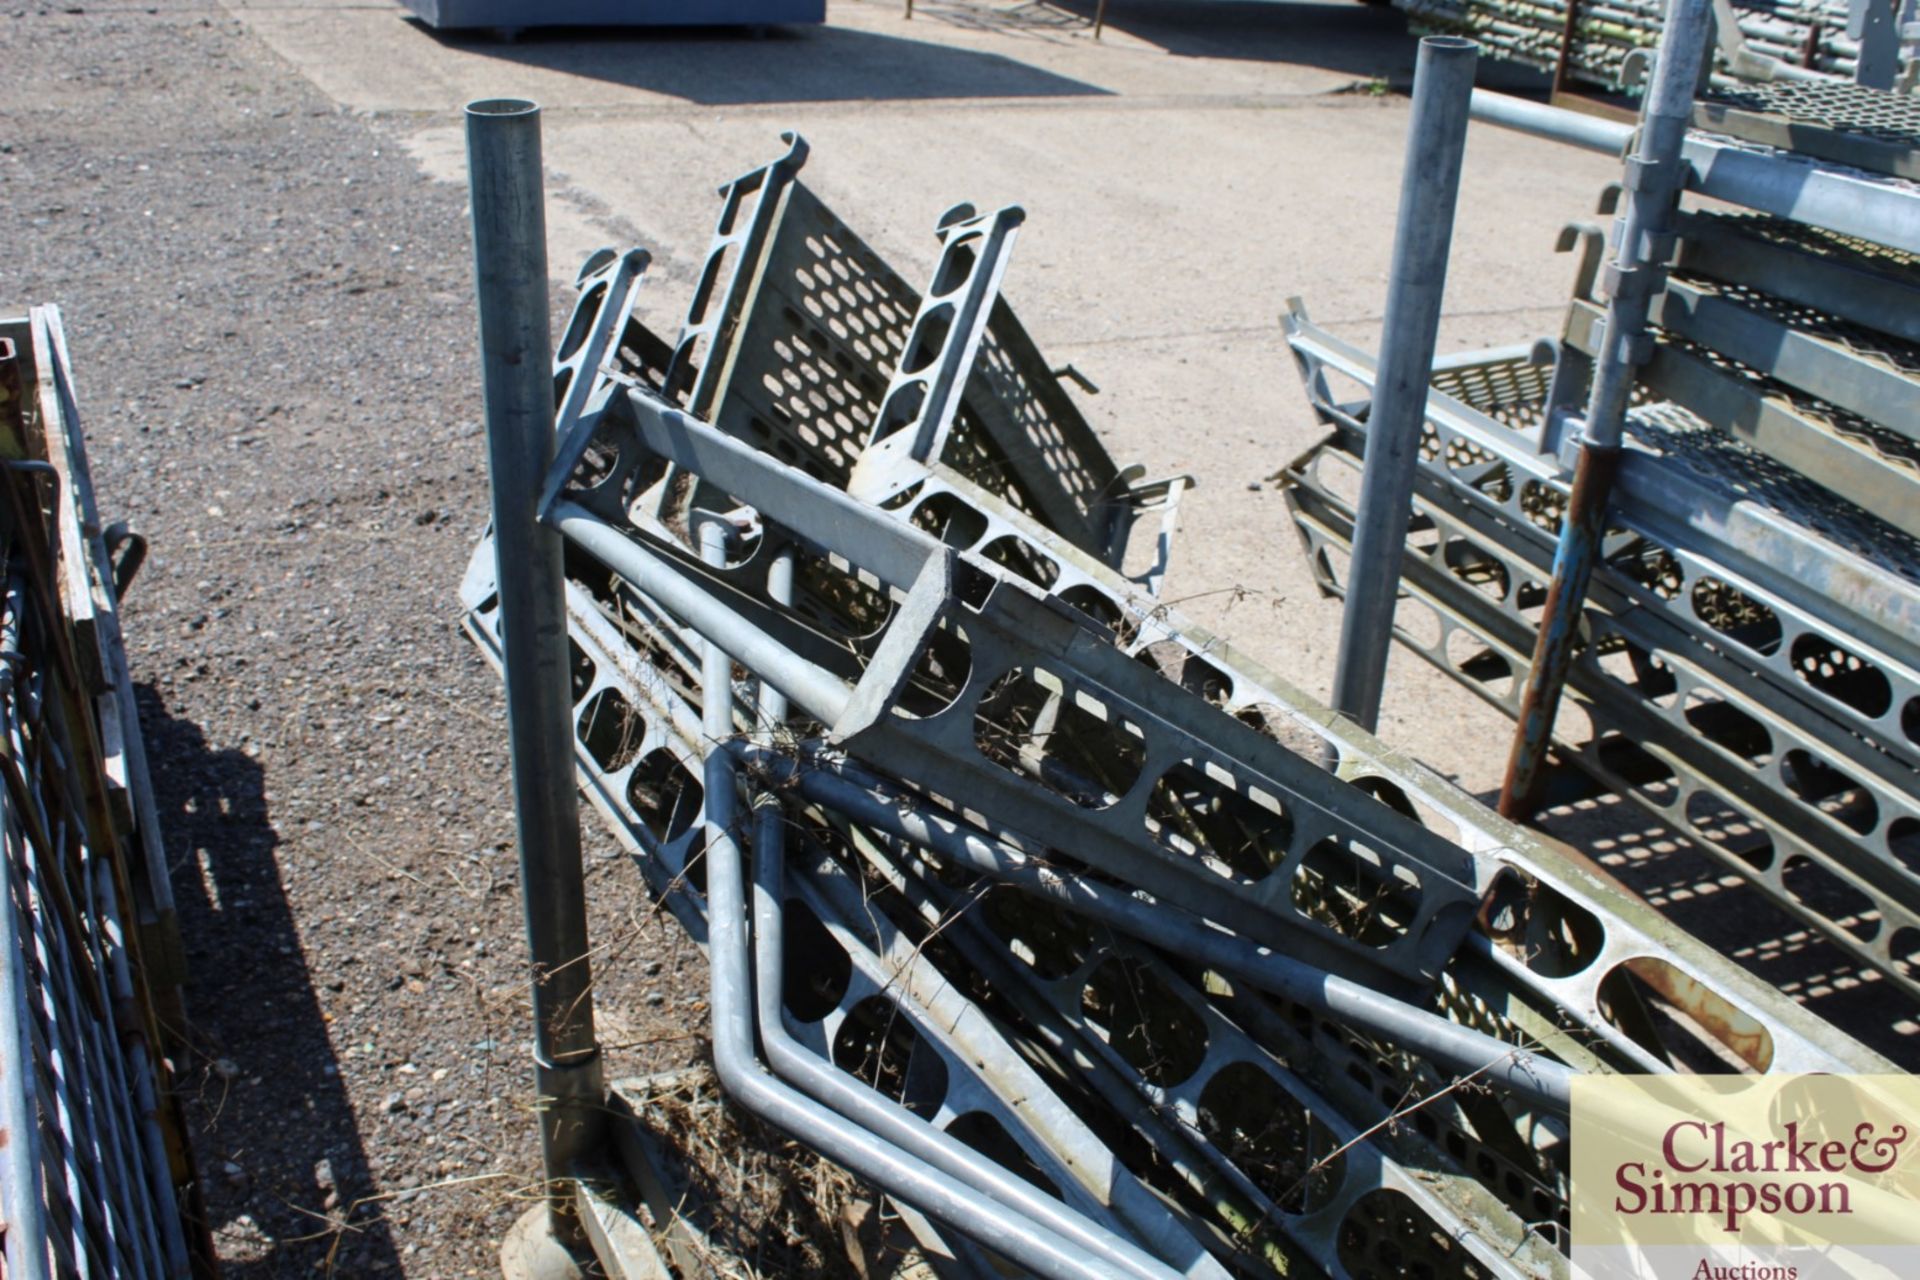 Stillage of Haki Scaffolding Staircase components. - Image 5 of 6